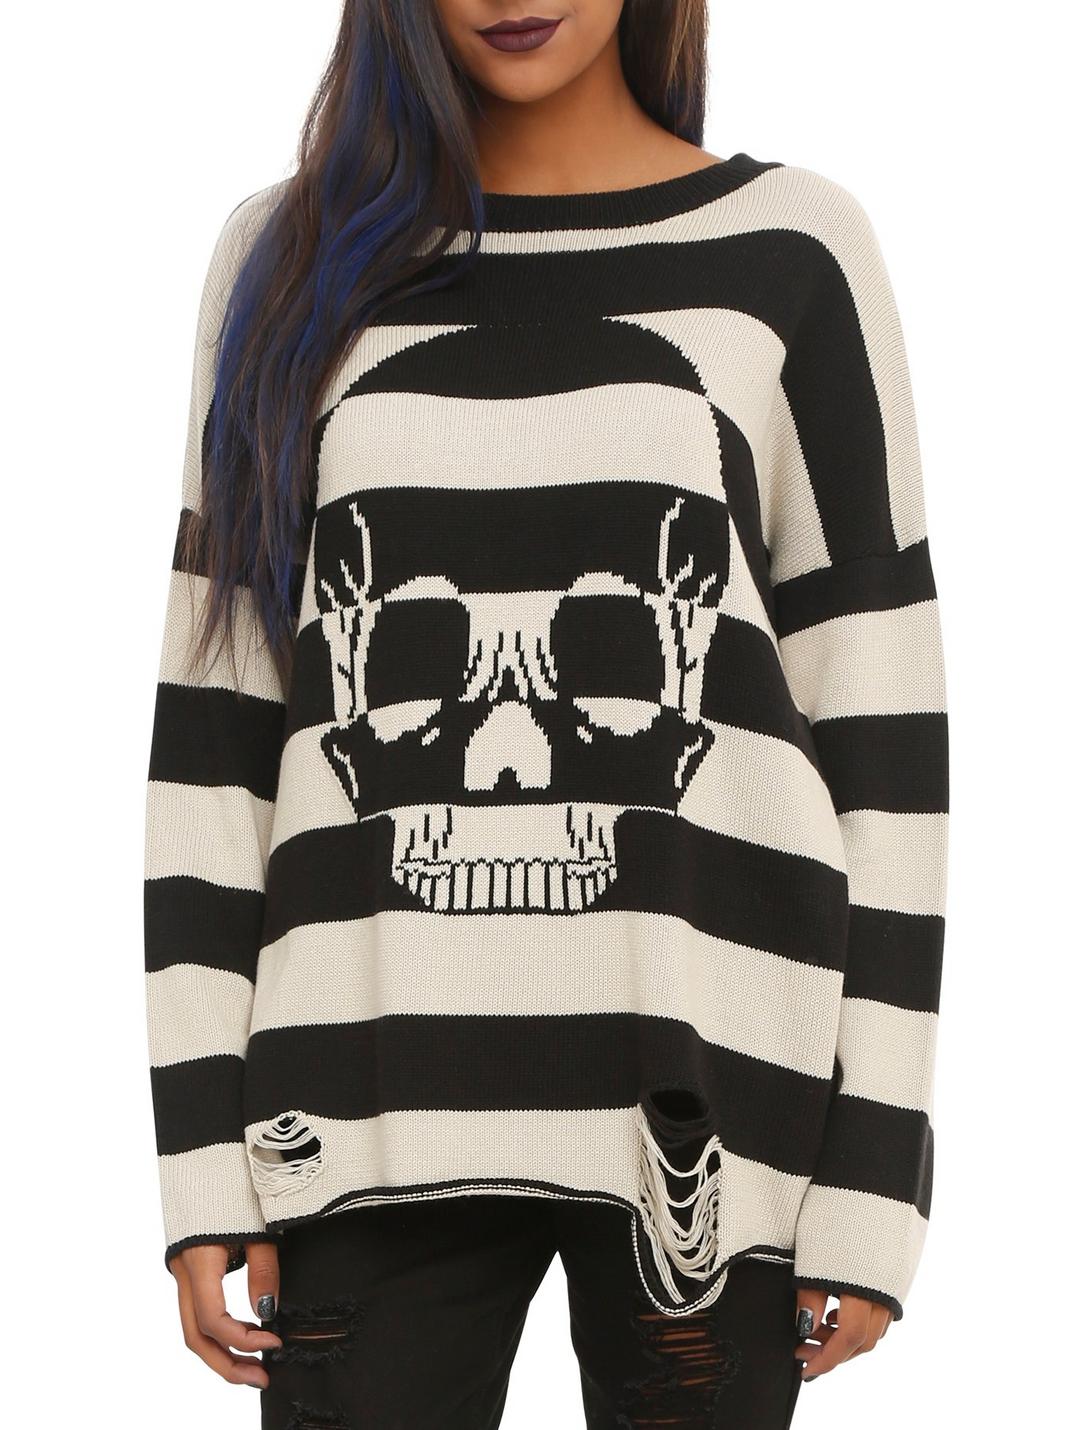 Iron Fist Urban Decay Striped Destructed Sweater, BLACK, hi-res